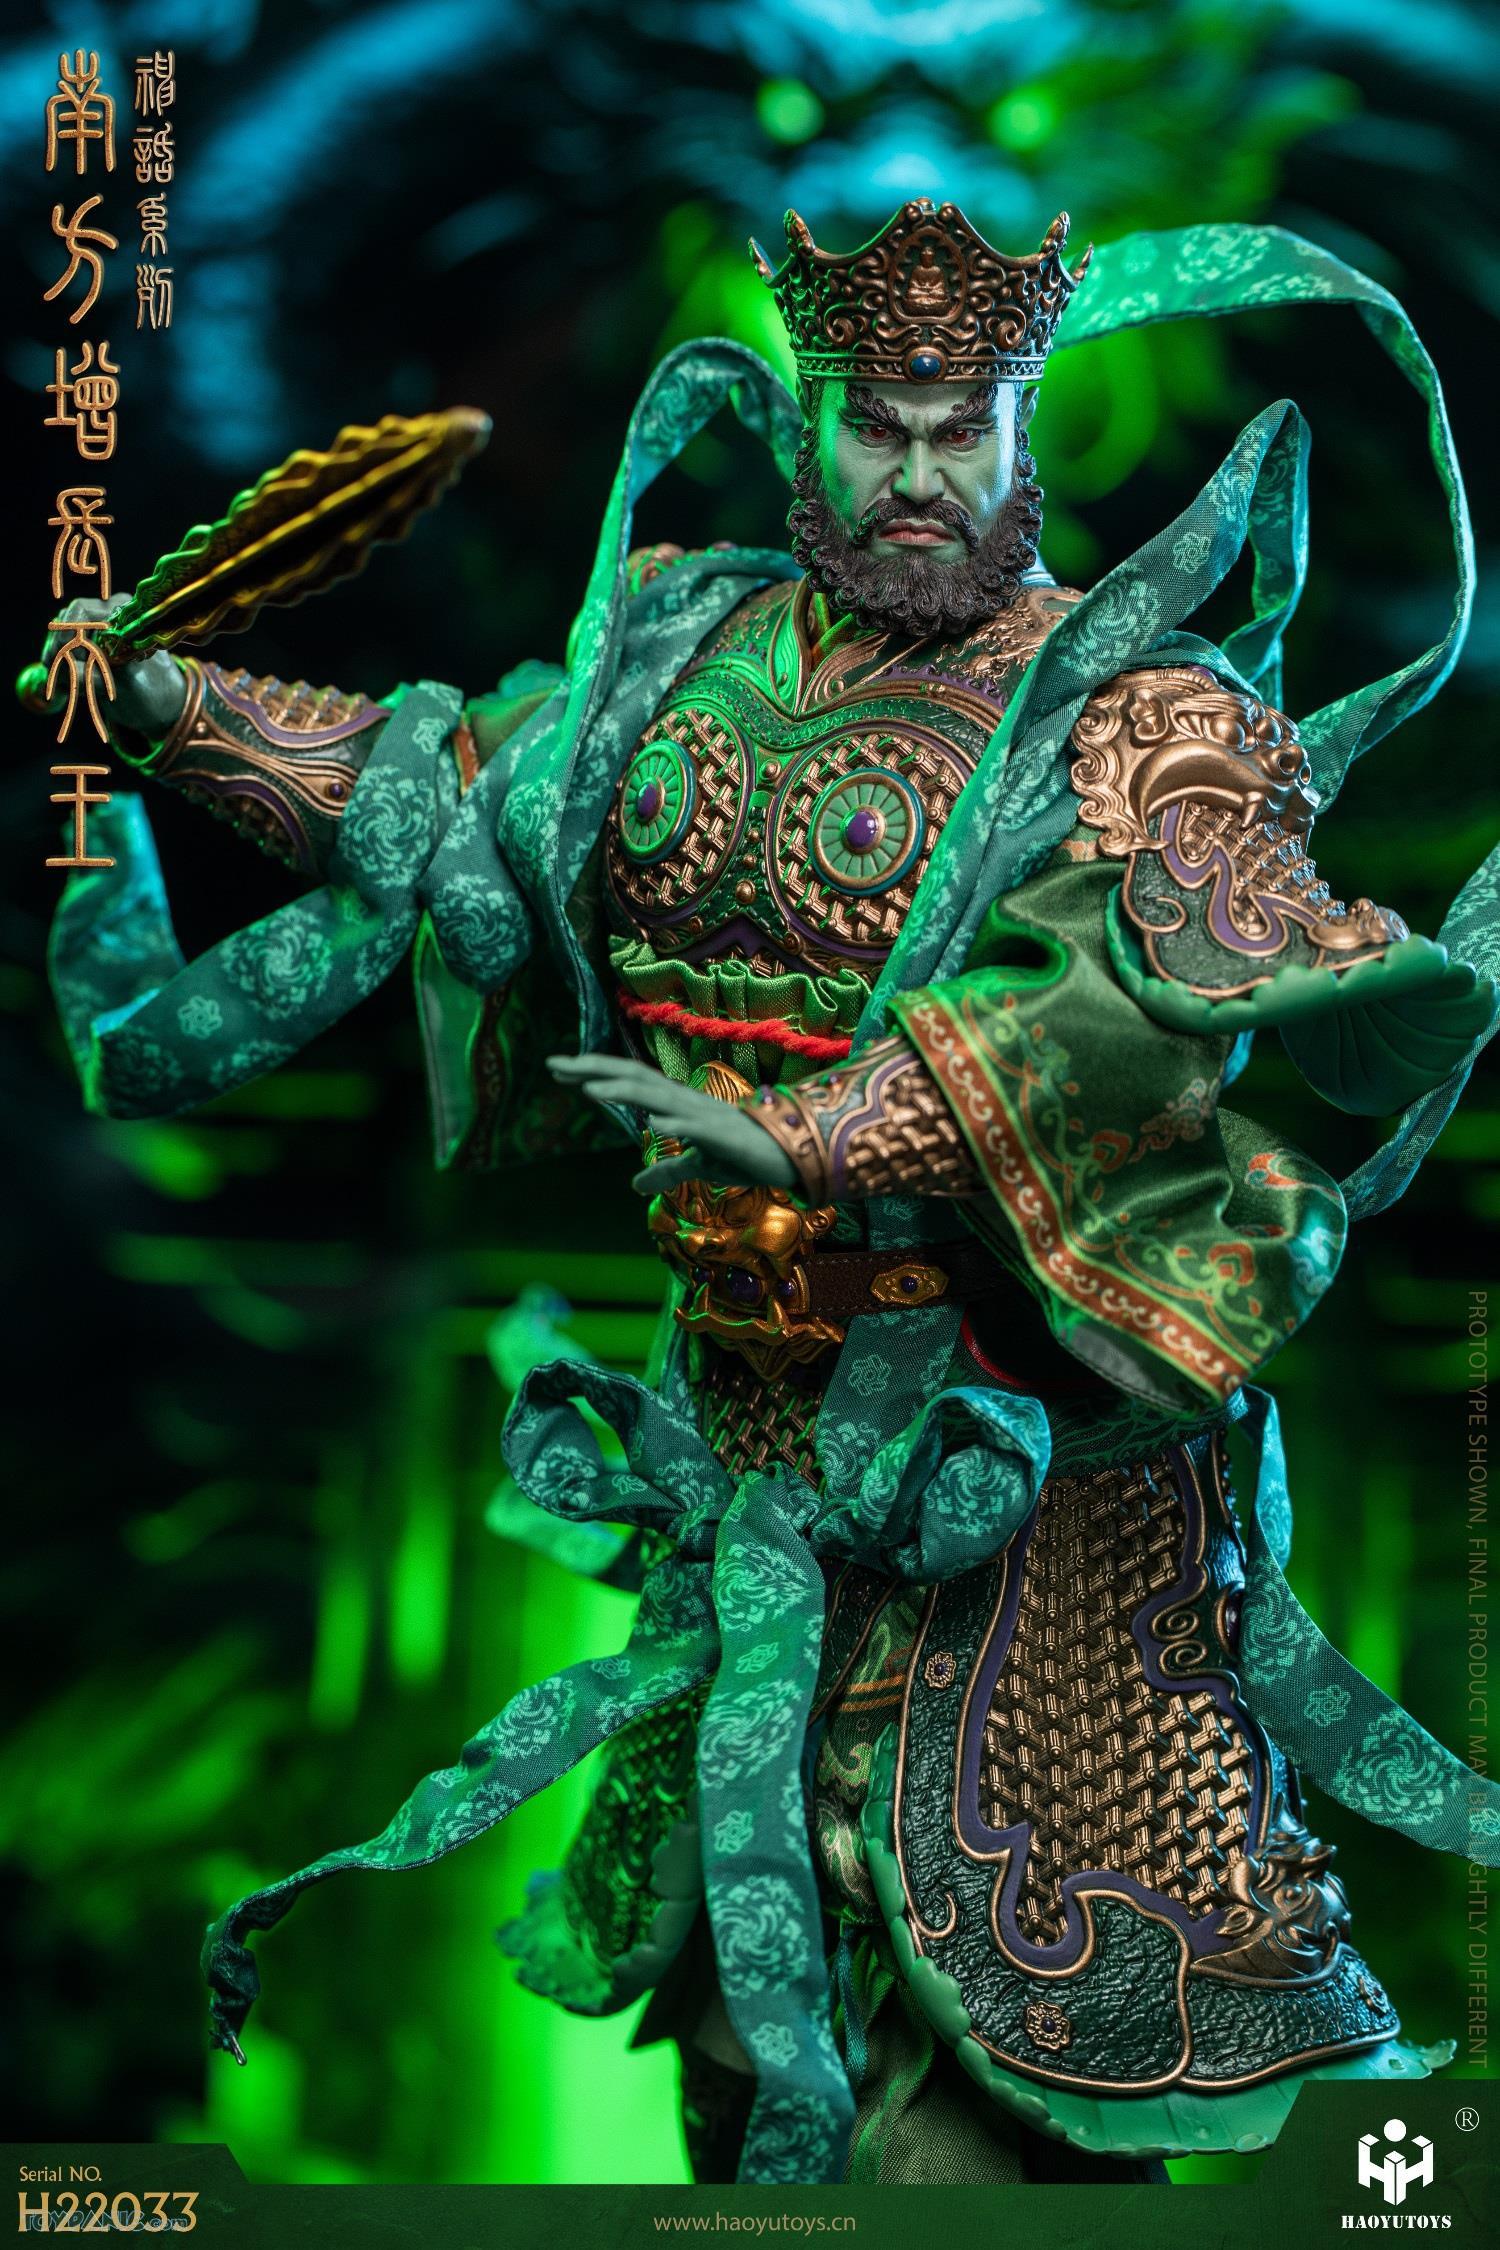 mythseries - NEW PRODUCT: HaoYuToys 1/6 Myth Series Southern Growth King 212202451835PM_1790101